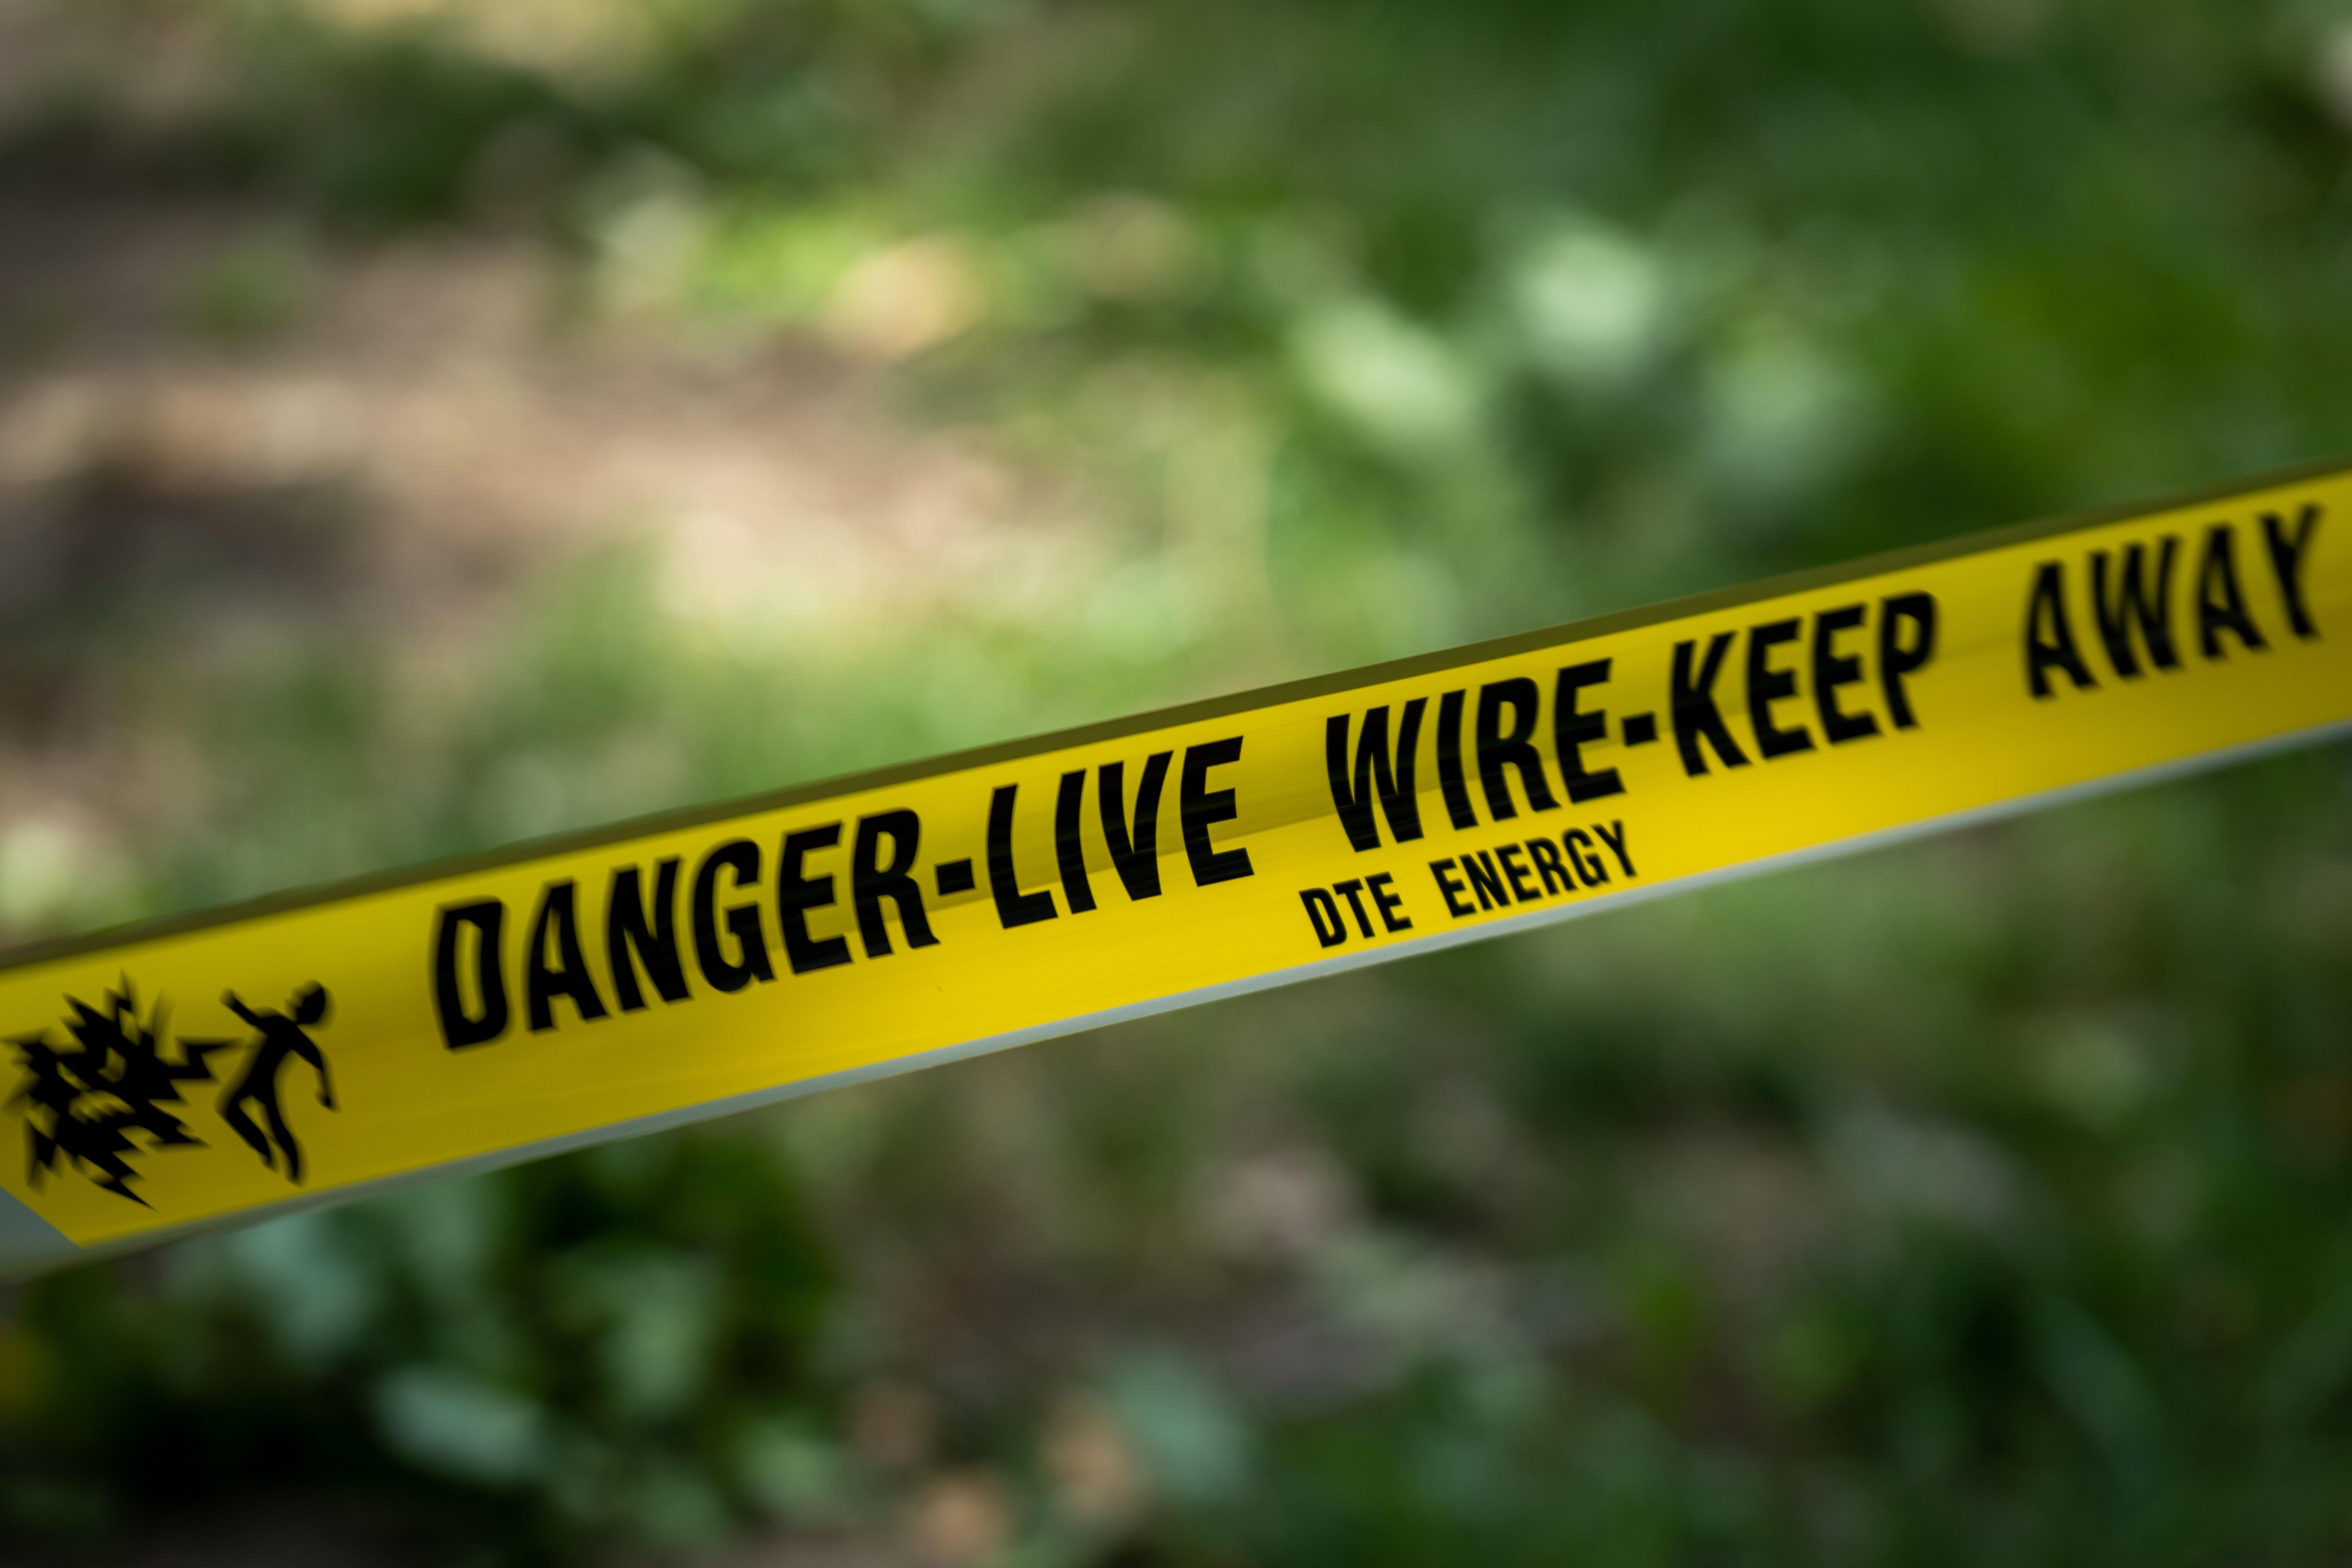 How to stay safe around electrical equipment